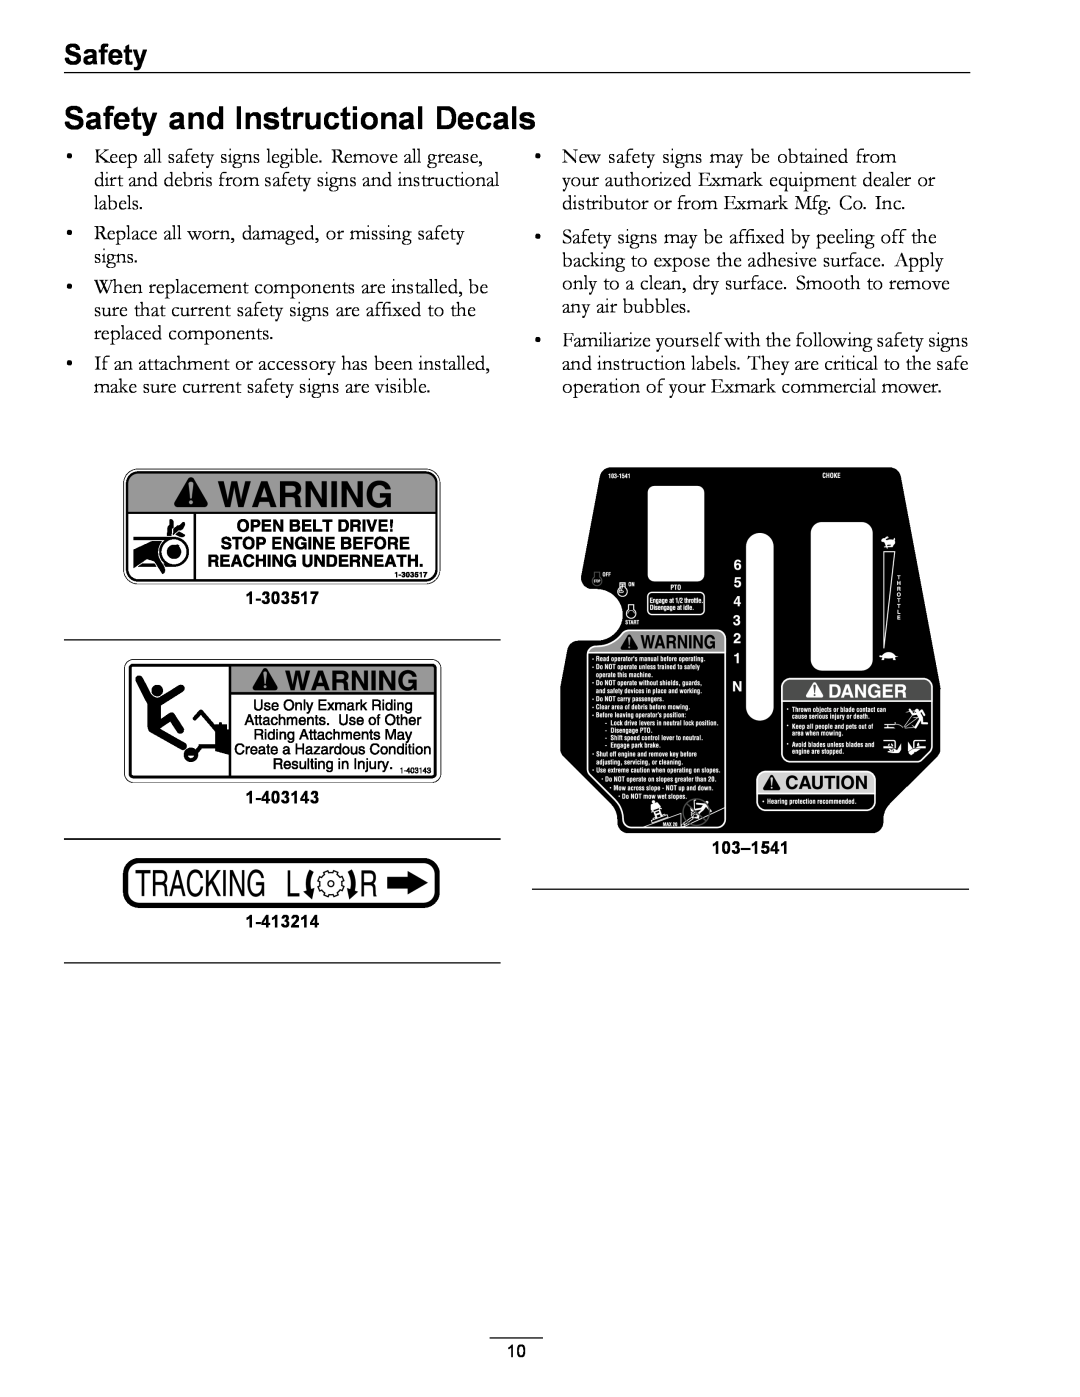 Exmark 4500-528 manual Safety and Instructional Decals 